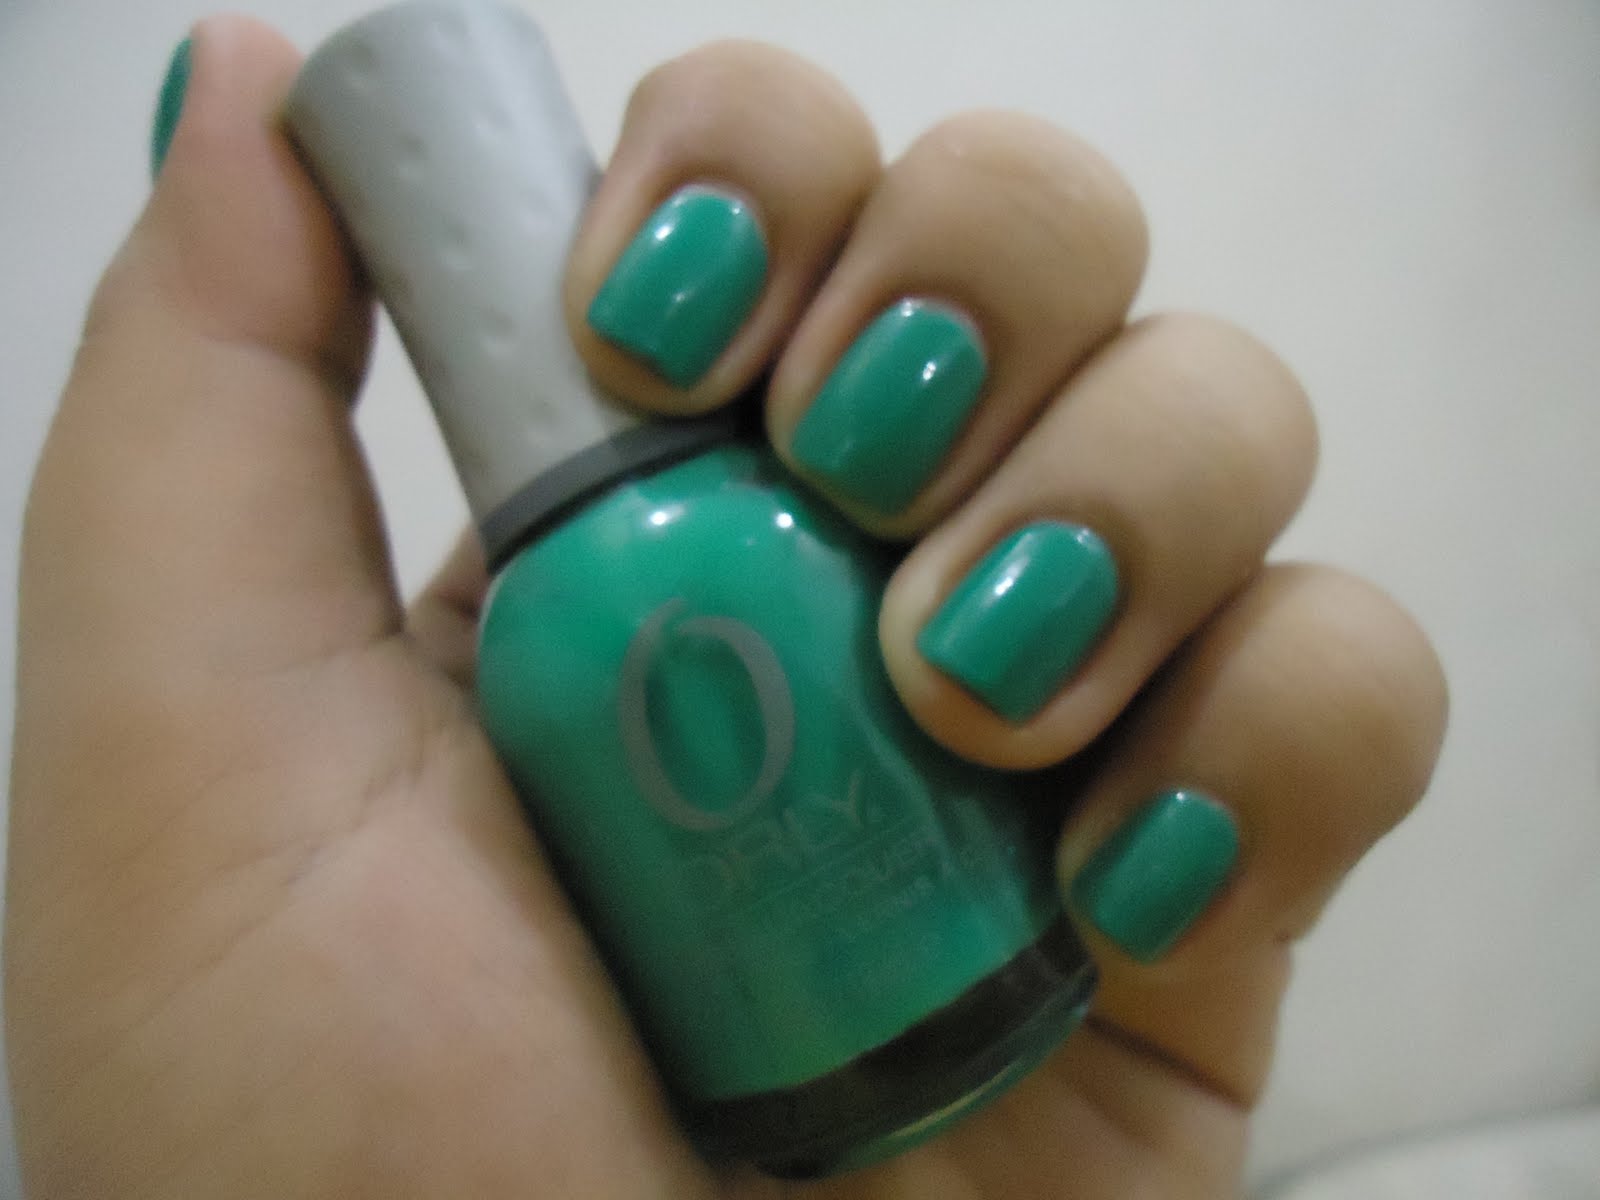 7. "Orly Green with Envy" - wide 10